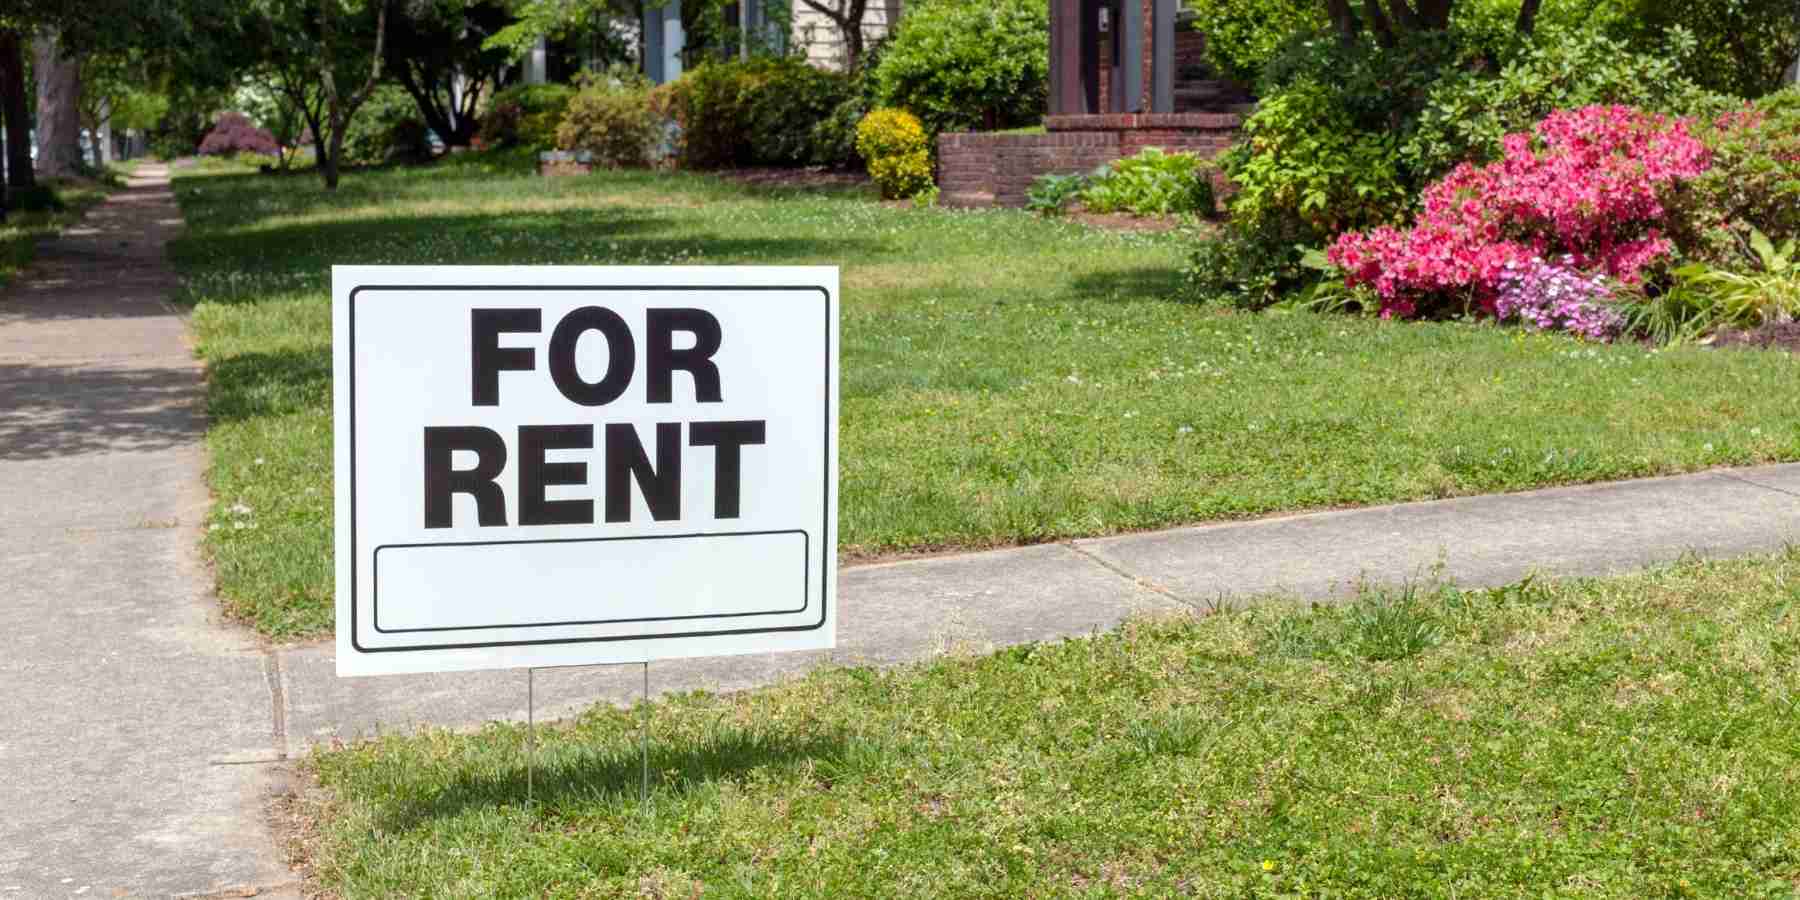 Fundrise vs Rental Property: Which is Better? (2022 Guide)